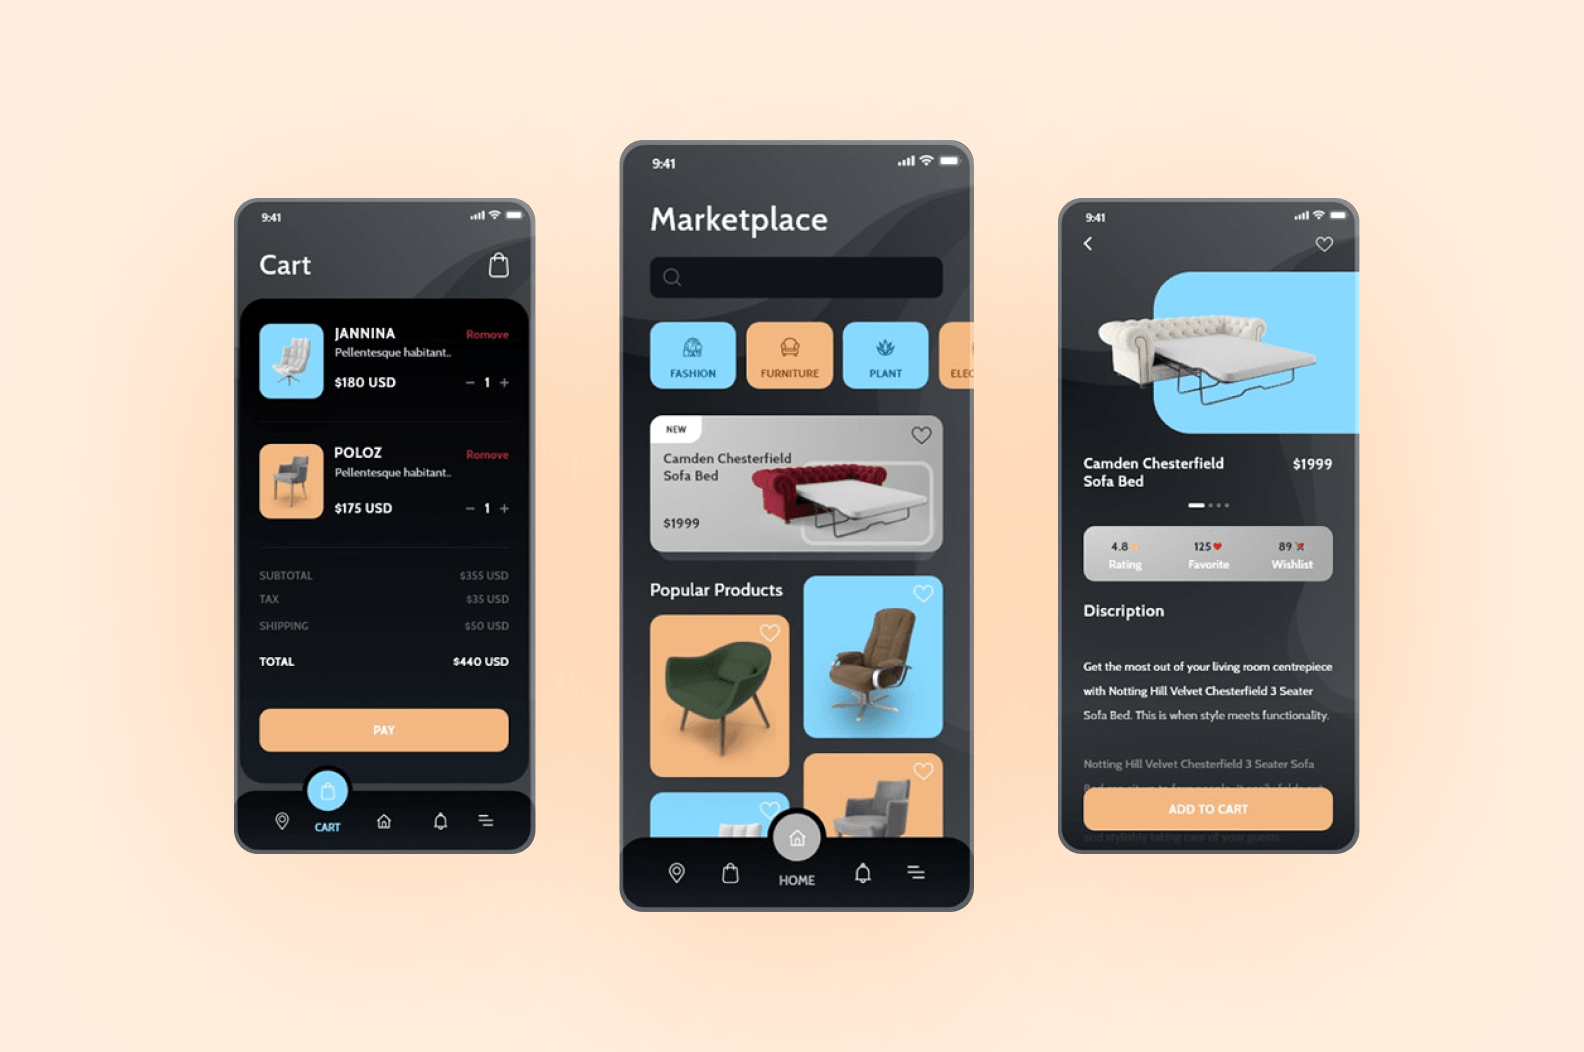 Basic features of a marketplace app